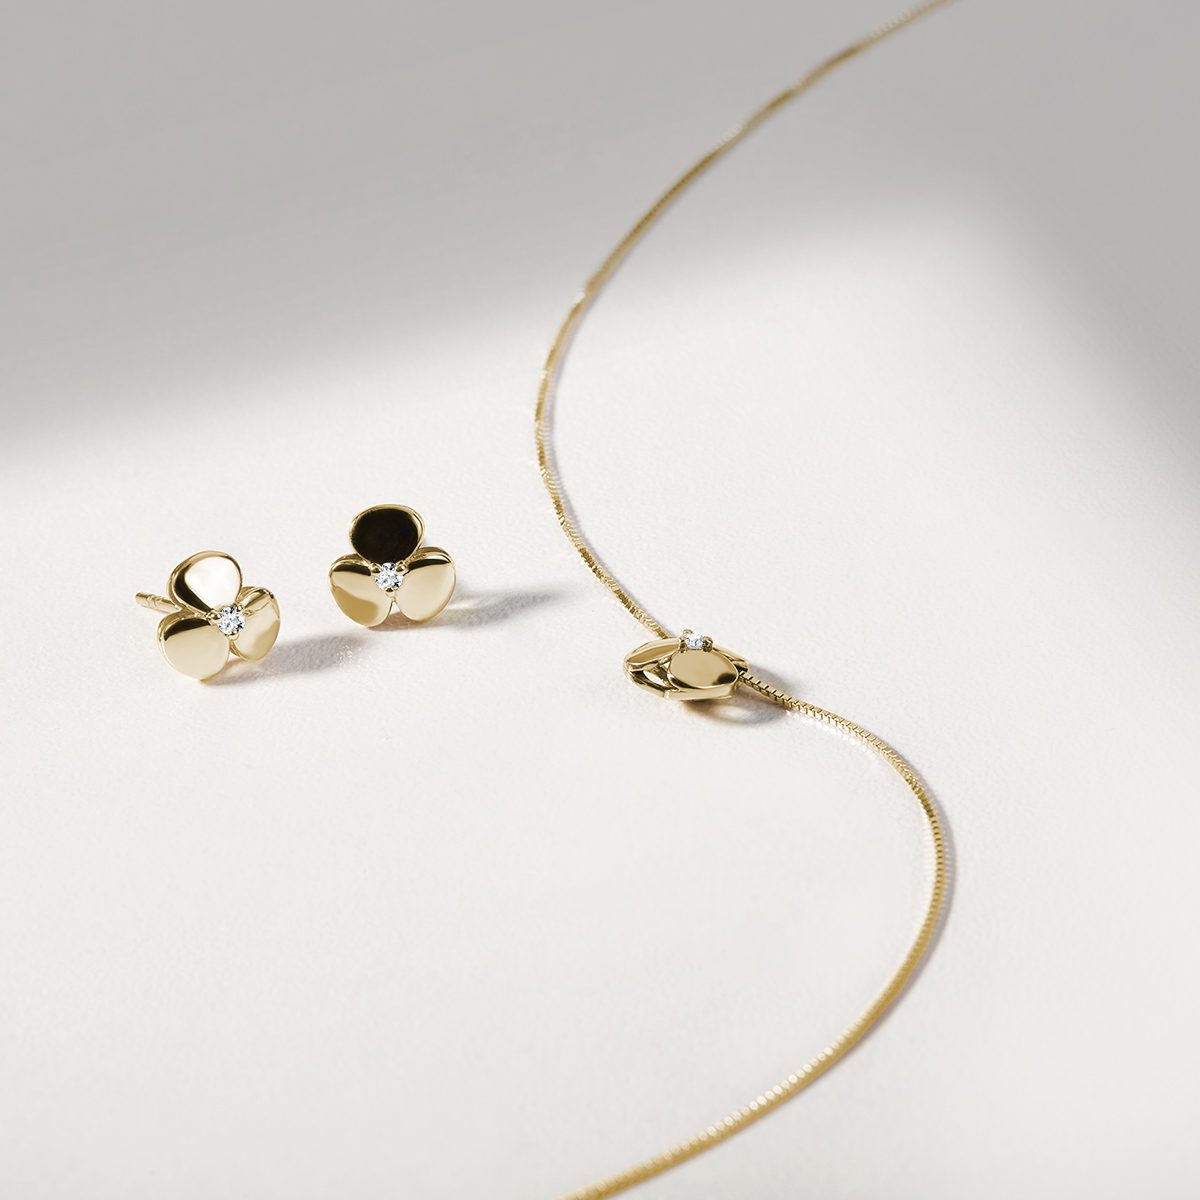 Gold earrings and diamond necklace - KLENOTA